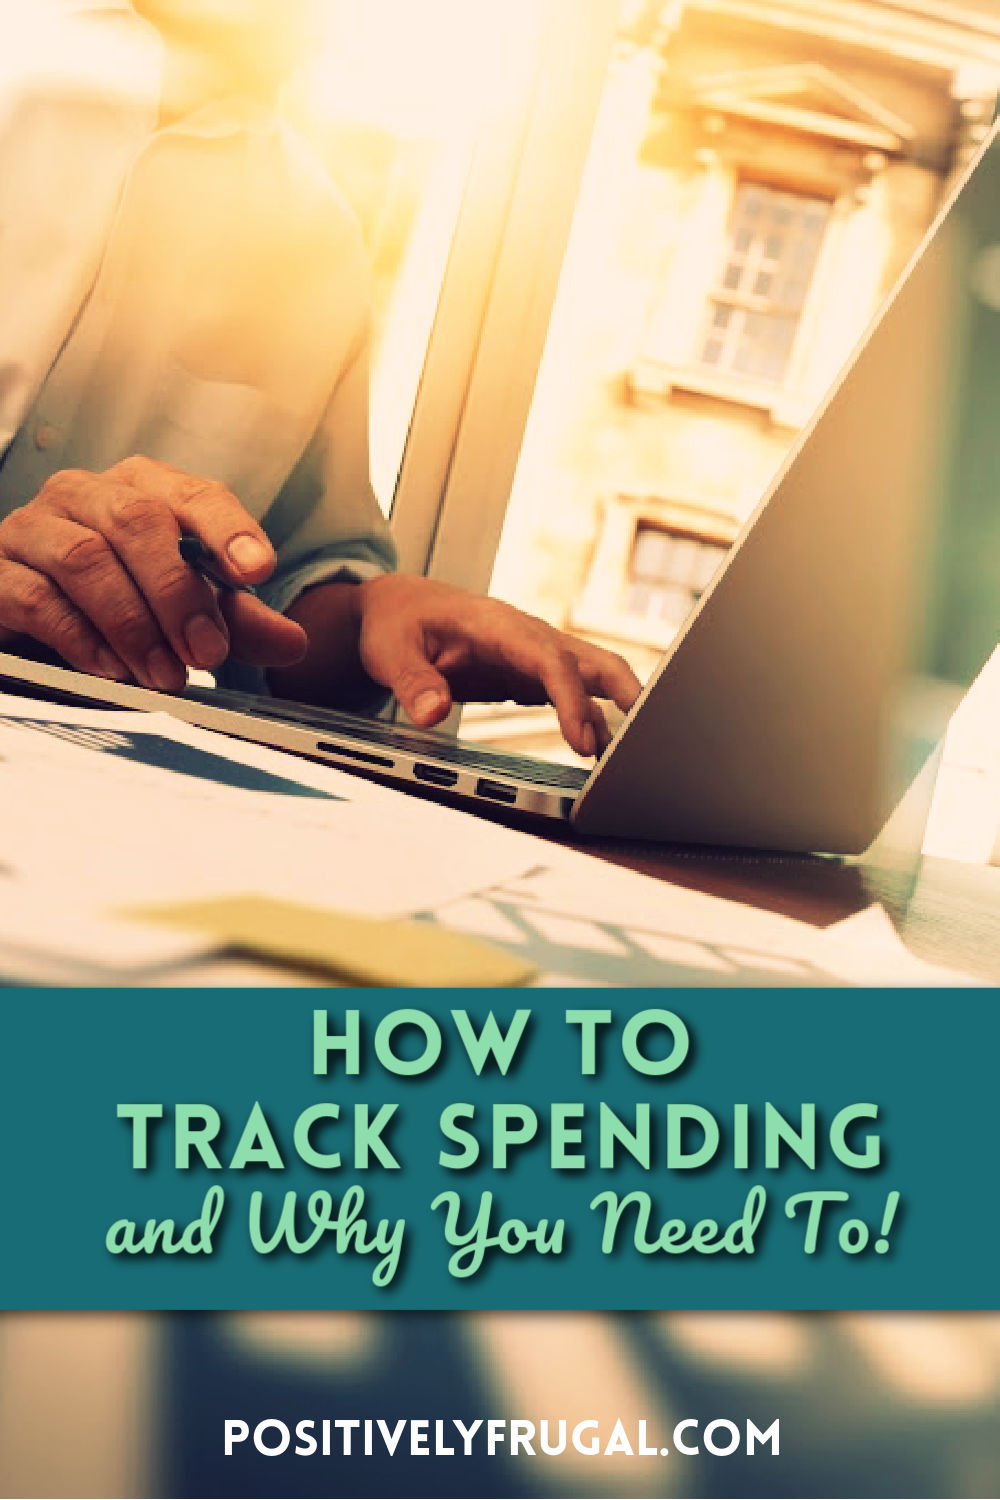 How To Track Spending and Why by PositivelyFrugal.com